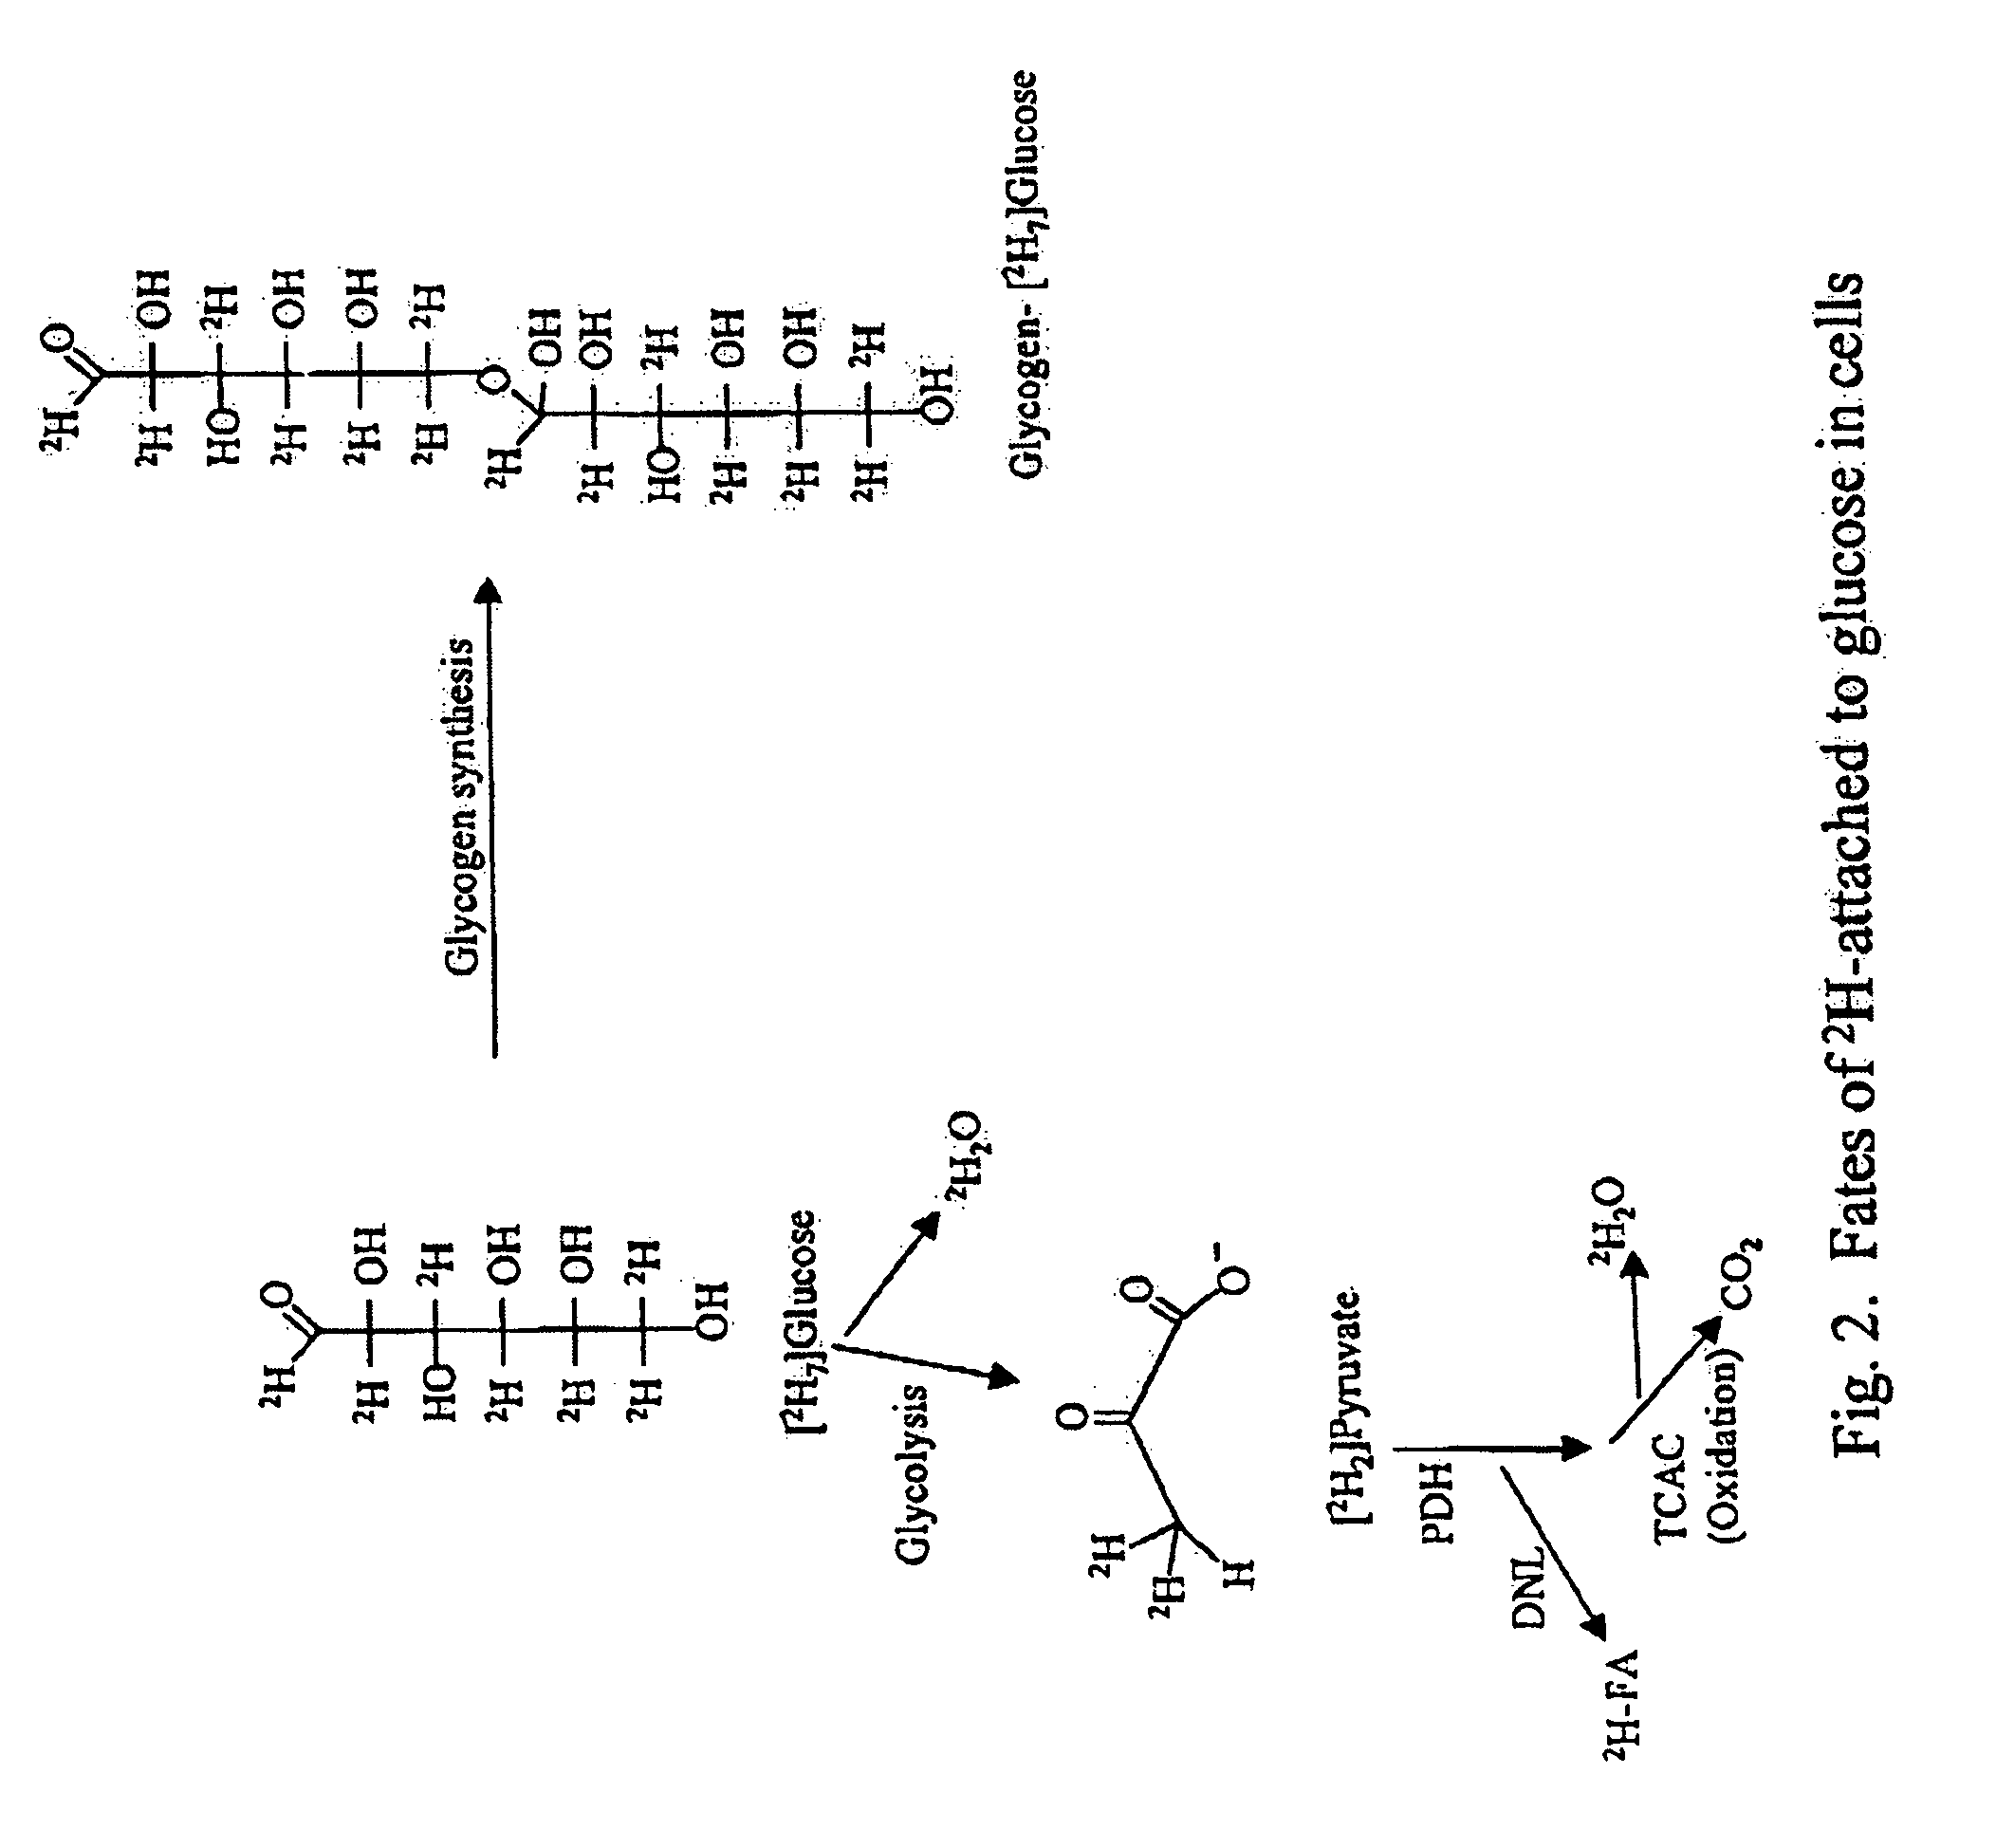 Methods for determining the metabolism of sugars and fats in an individual